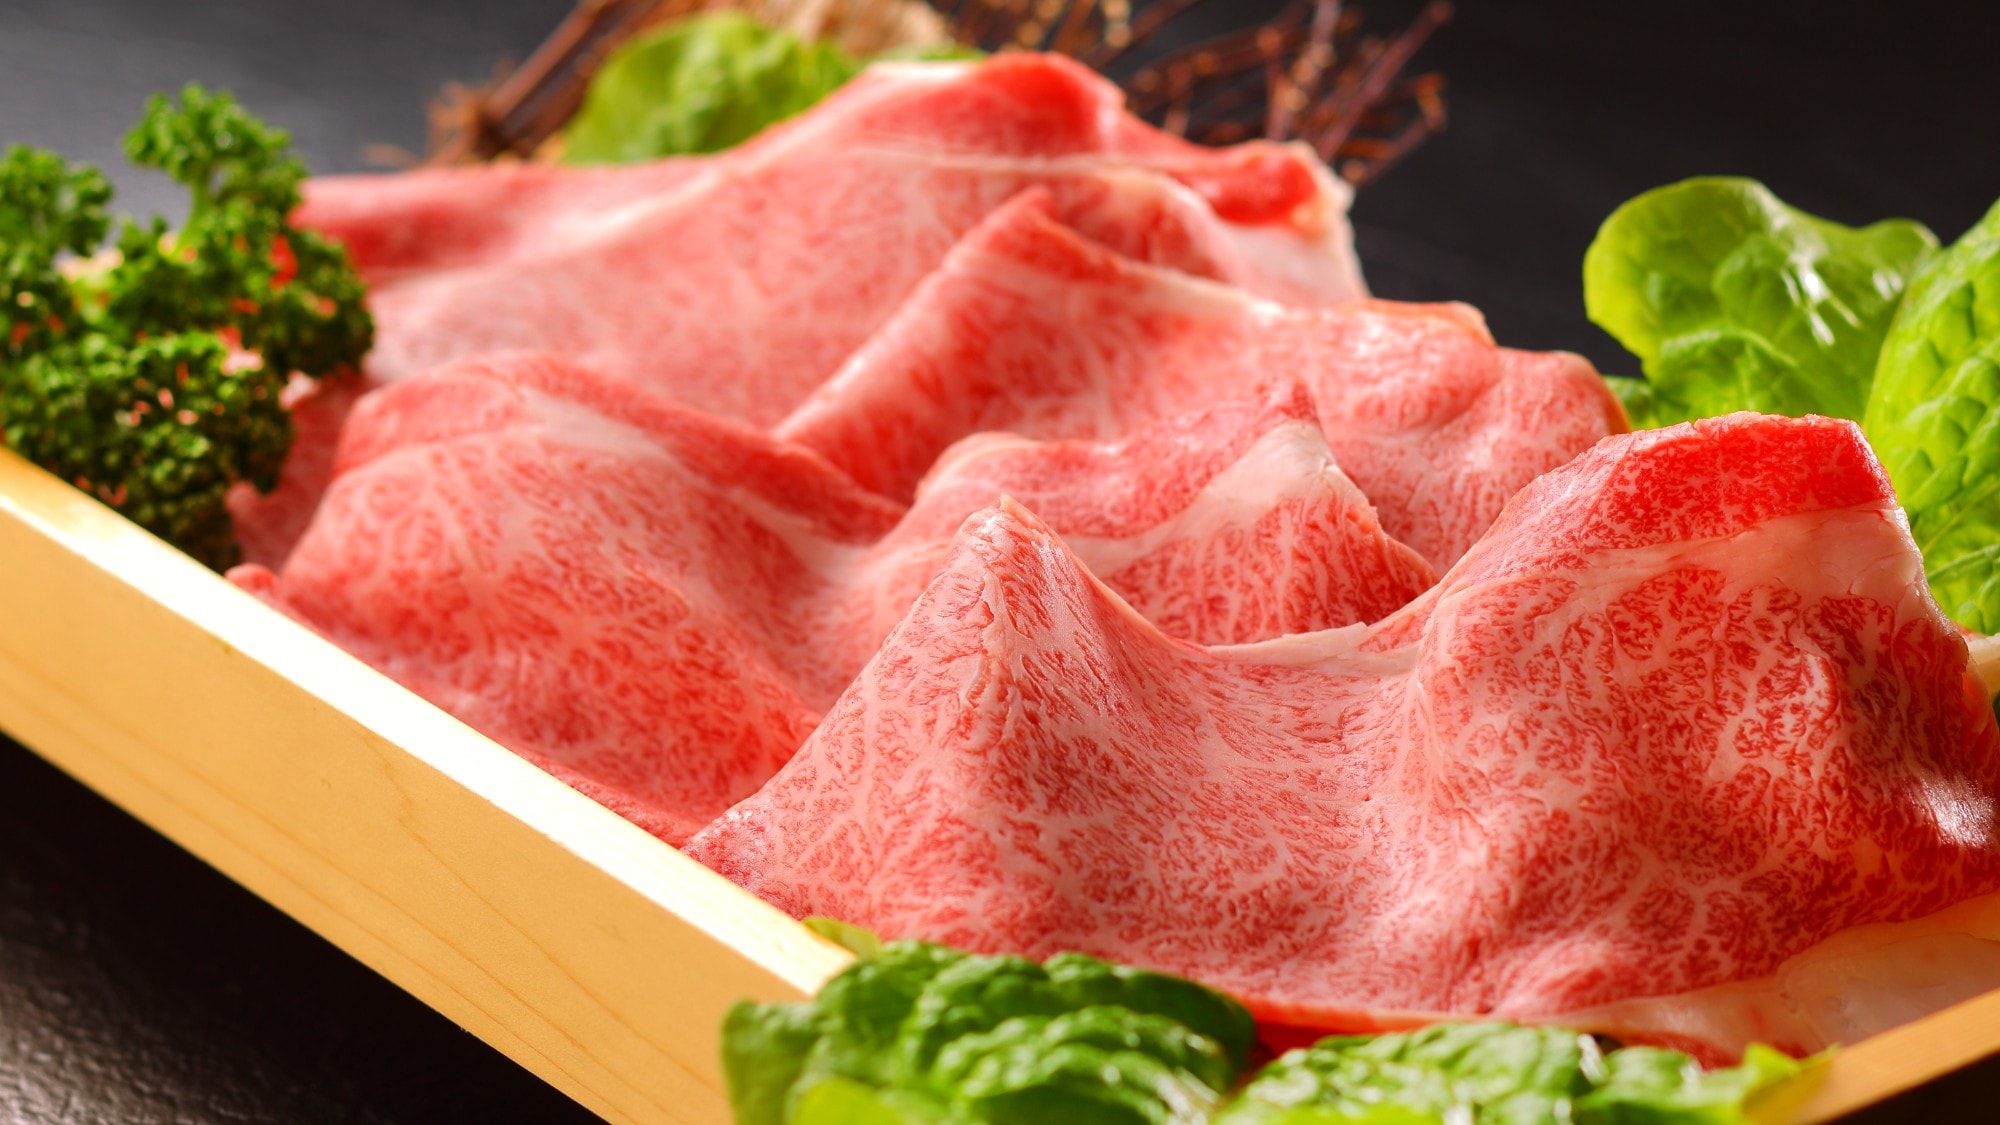 Enjoy A5 Sendai beef with a perfect balance of fat and lean meat